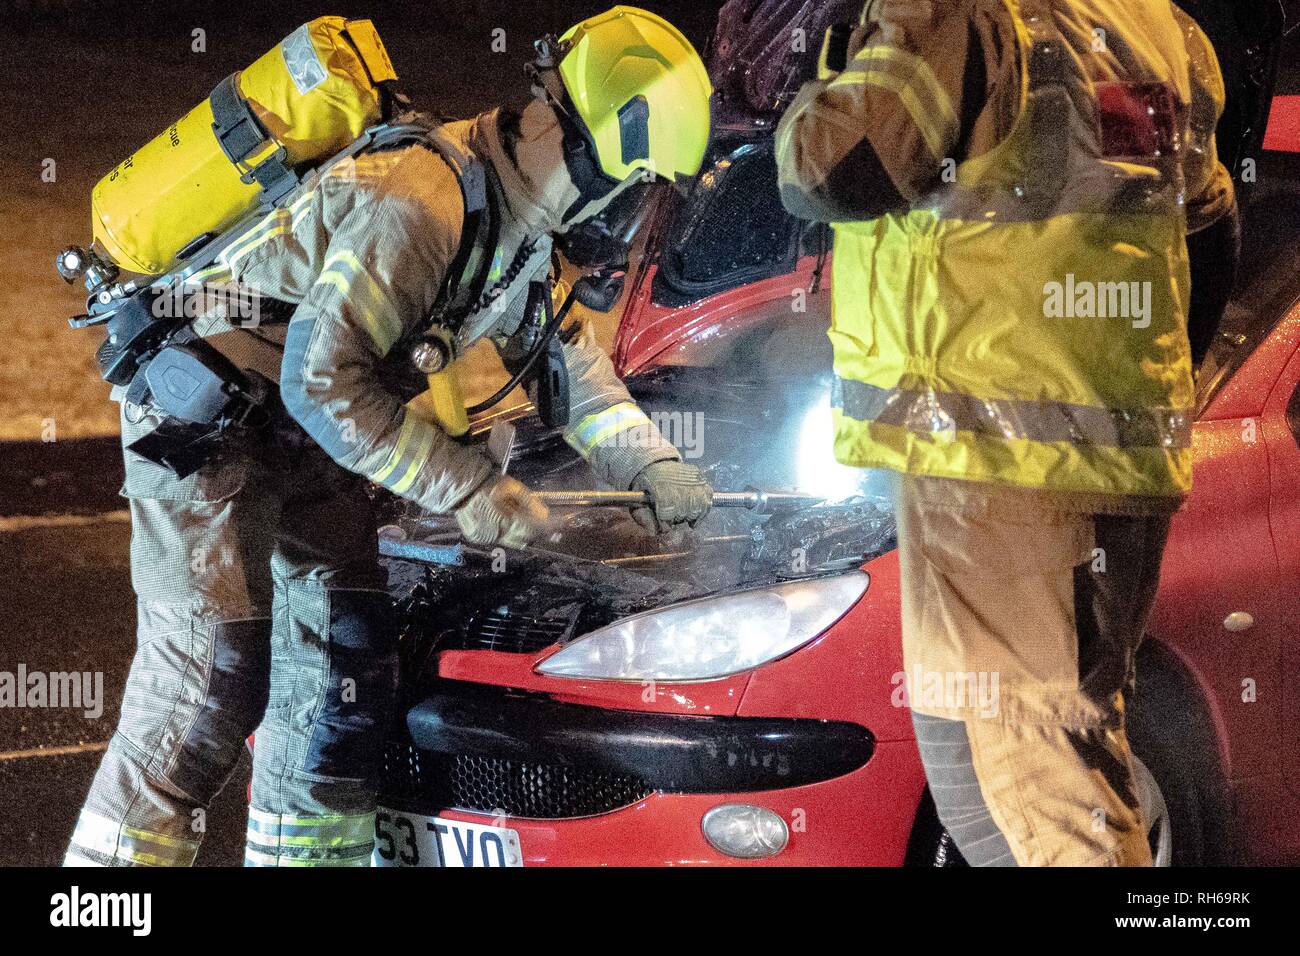 A member of the Fire Service is seen in full respiratory system with a Halligan Bar to remove the car's battery. A car caught fire tonight on the B9096 in Tullibody. Fire & Rescue and Police were on scene. There were no injuries. Fire & Rescue brought the fire under control and put it out. Stock Photo